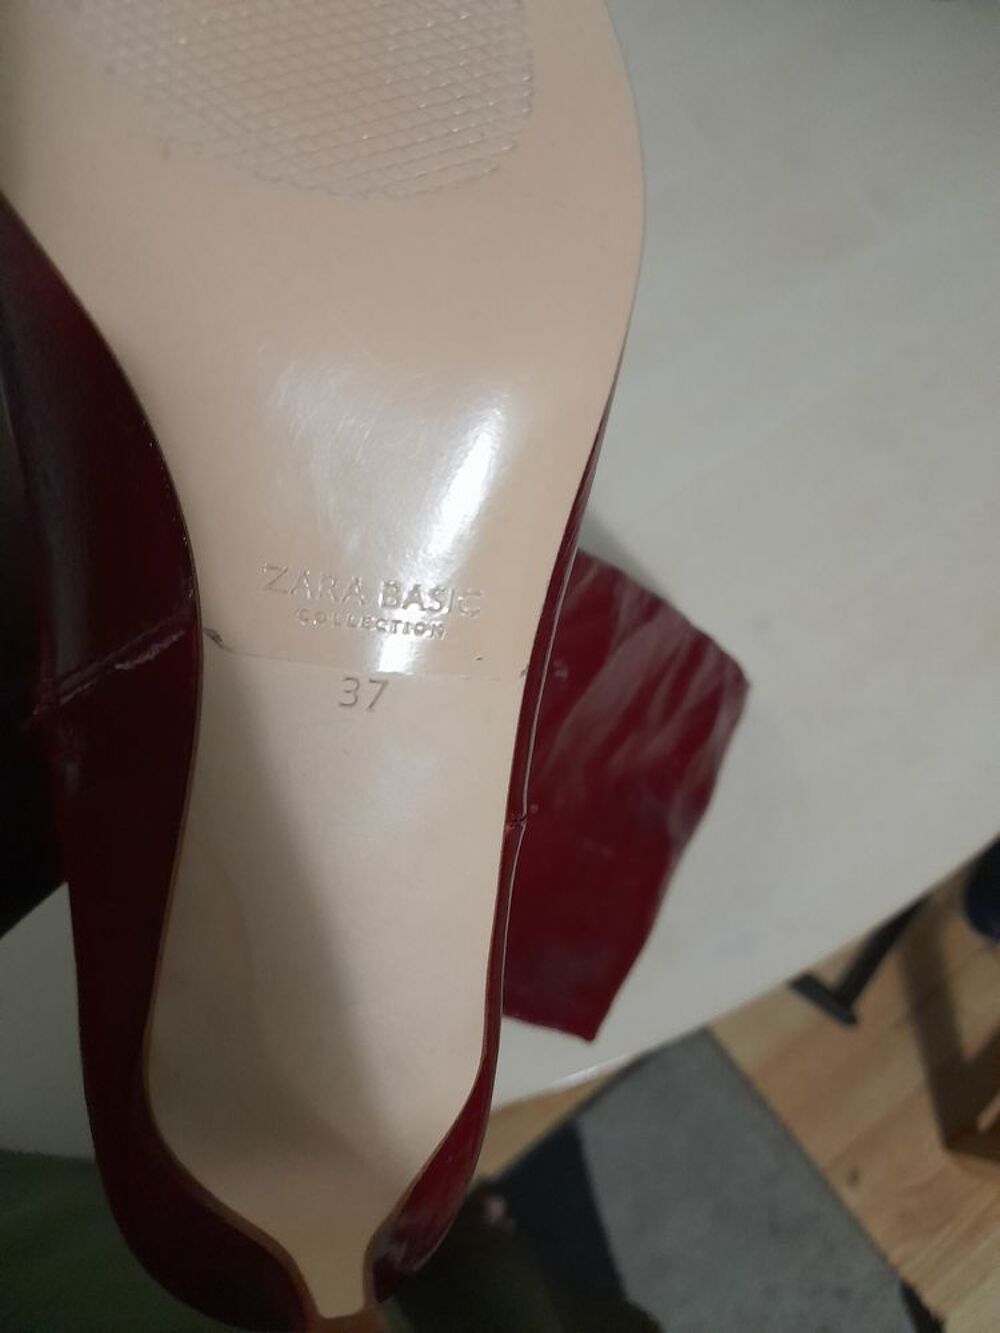 Botte zara basic collection neuf taille 37 Chaussures